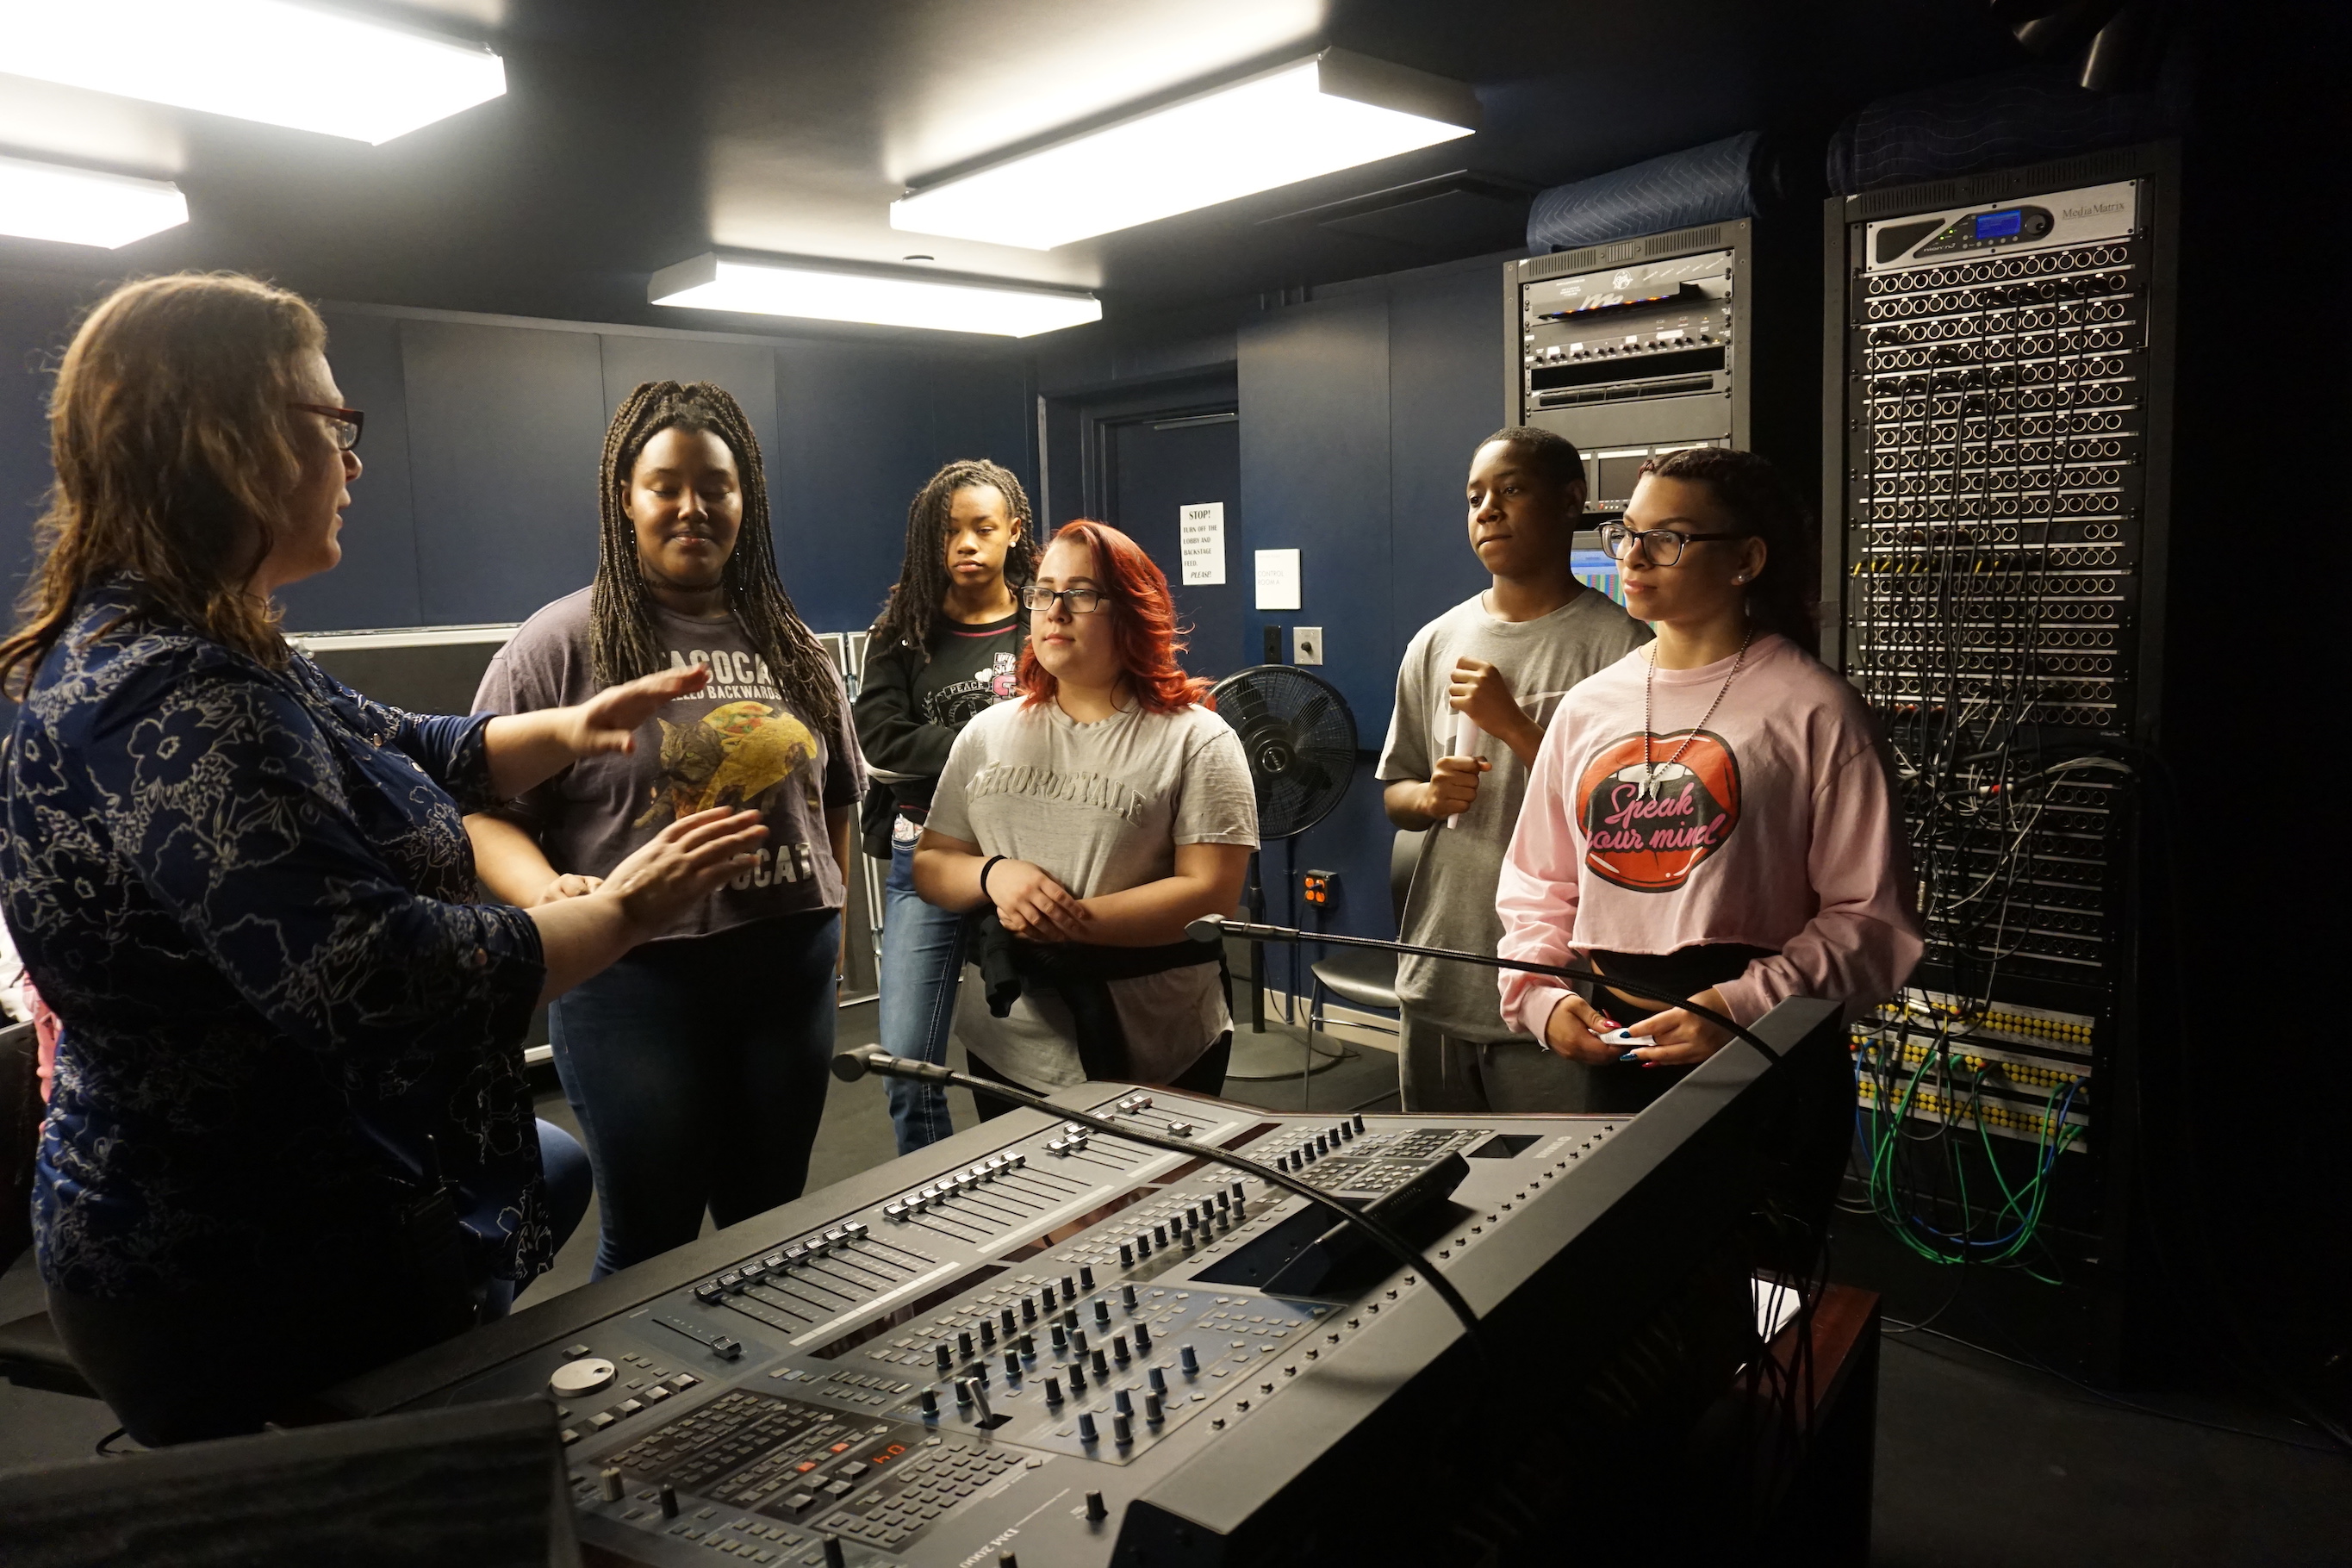 New Backstage Intensive Program Introduces Students To Careers In